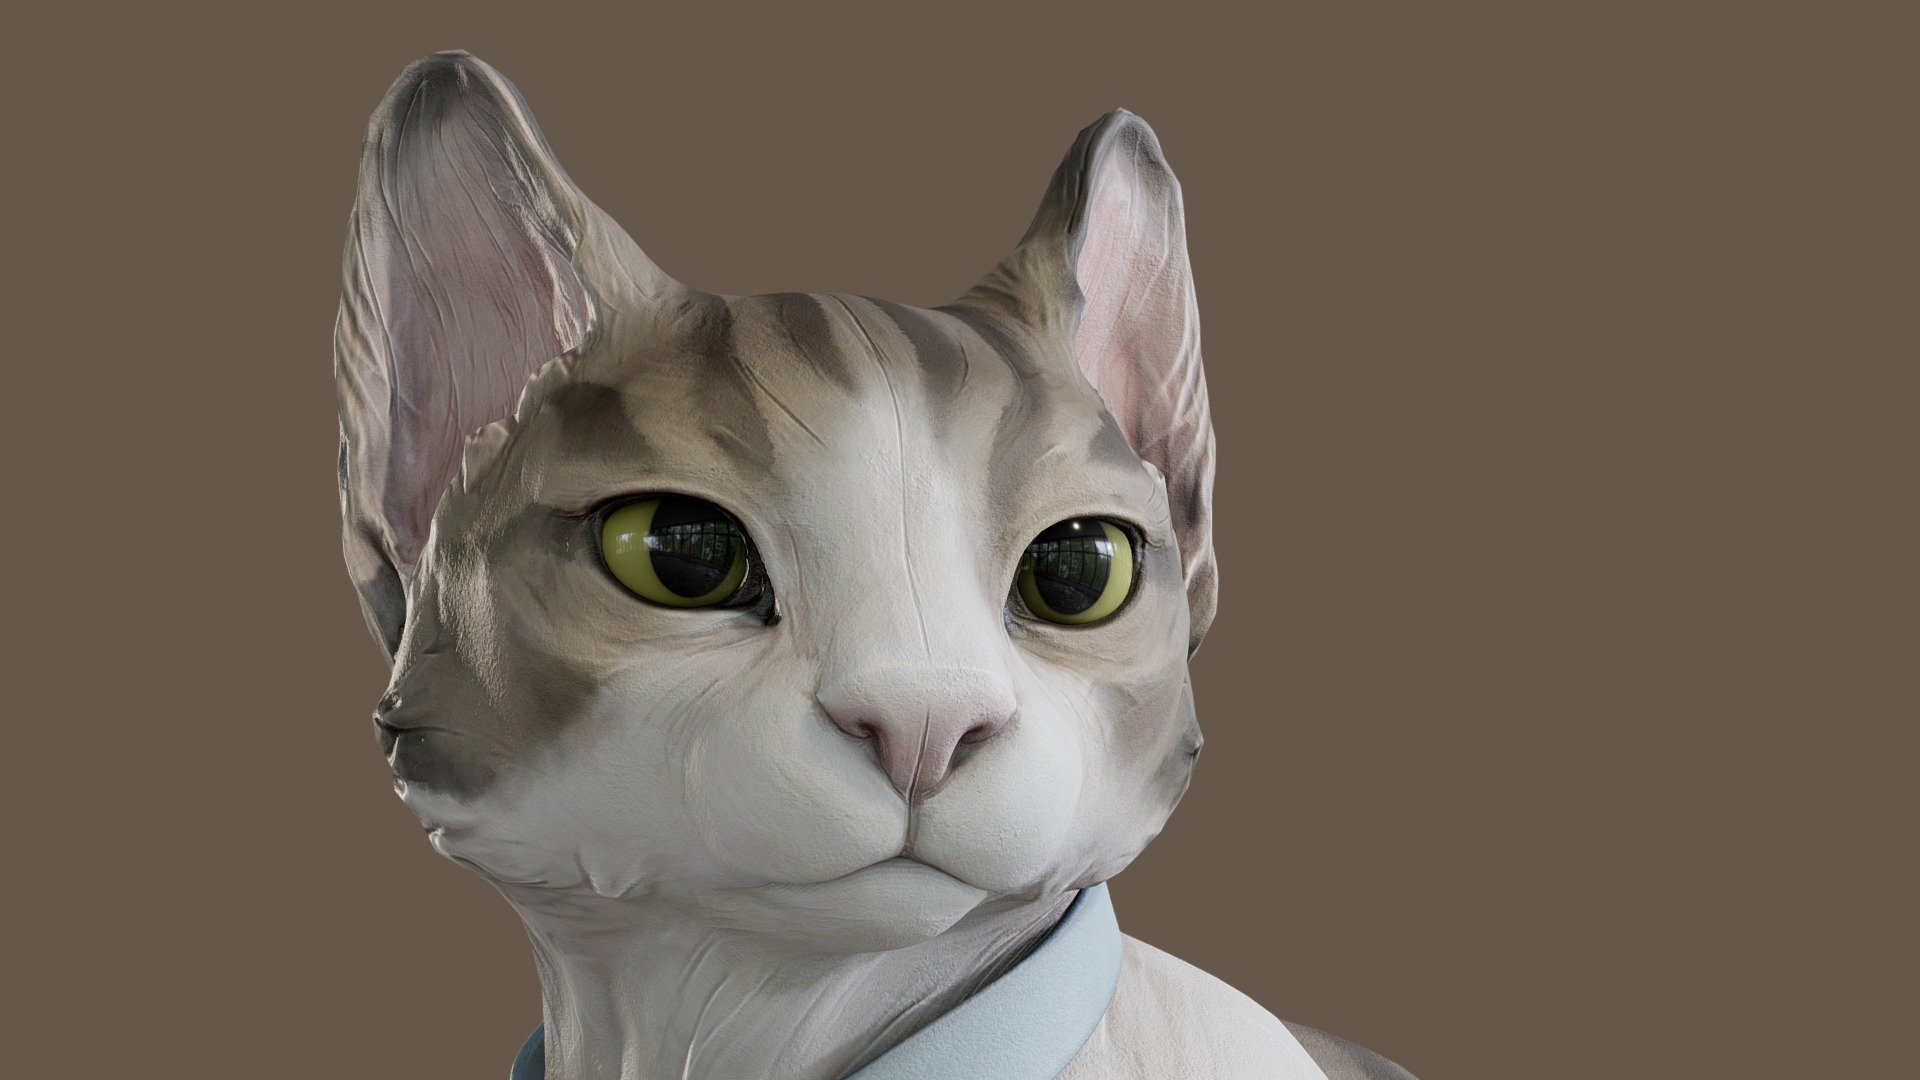 Tried out the Maria Panfilova's tutorial on artistic animal sculpting and sculpted our office cat 3d model